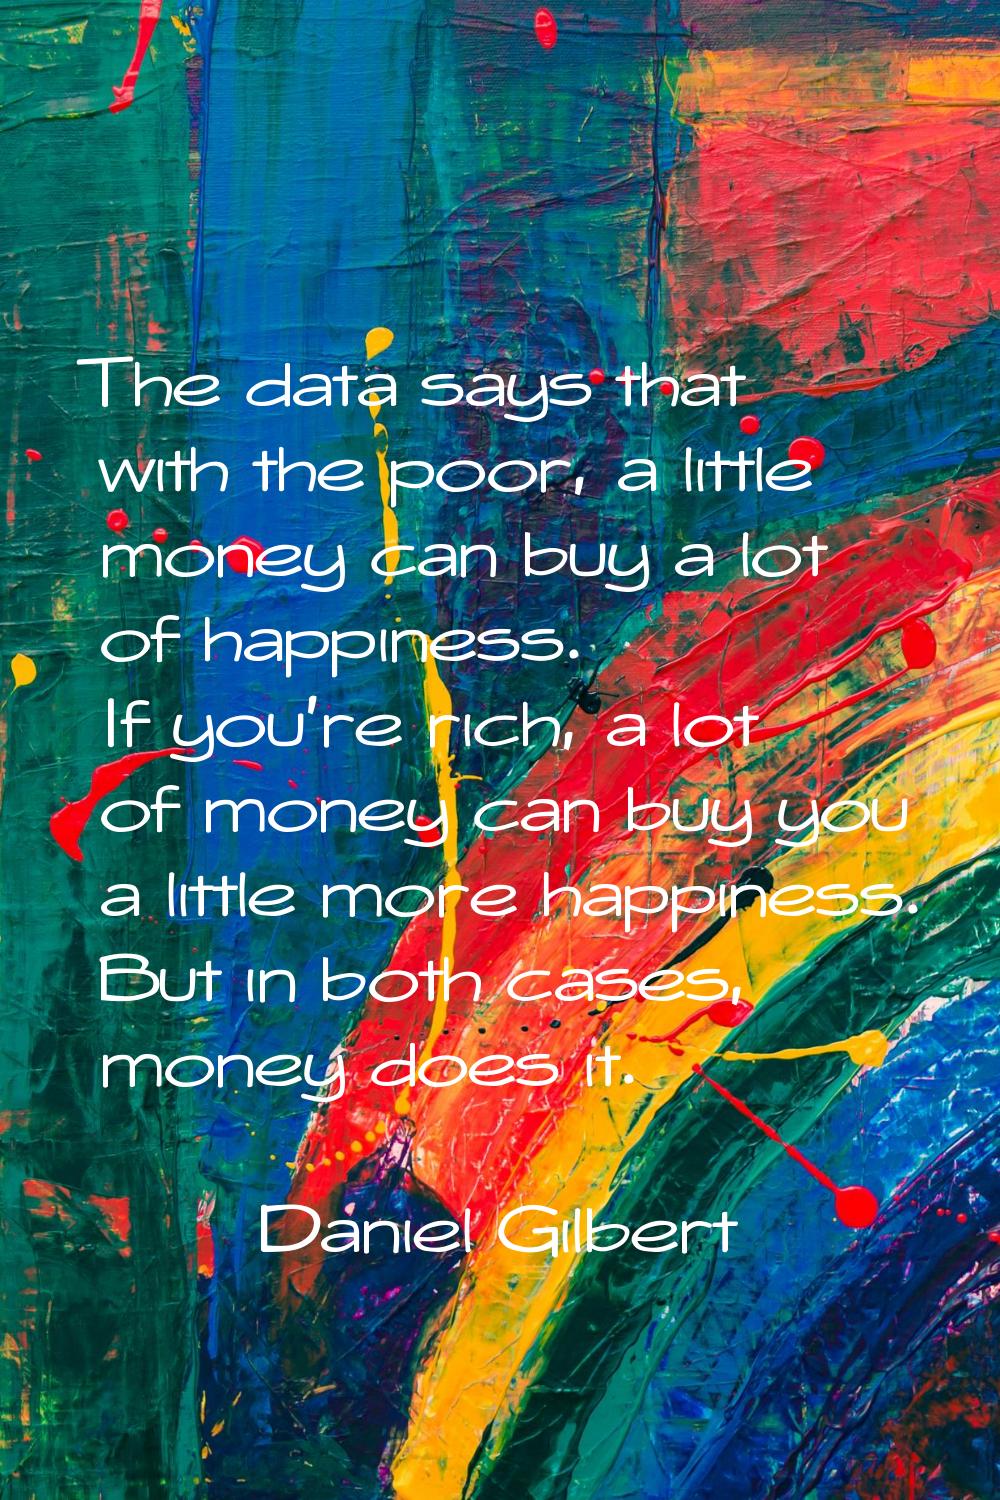 The data says that with the poor, a little money can buy a lot of happiness. If you're rich, a lot 